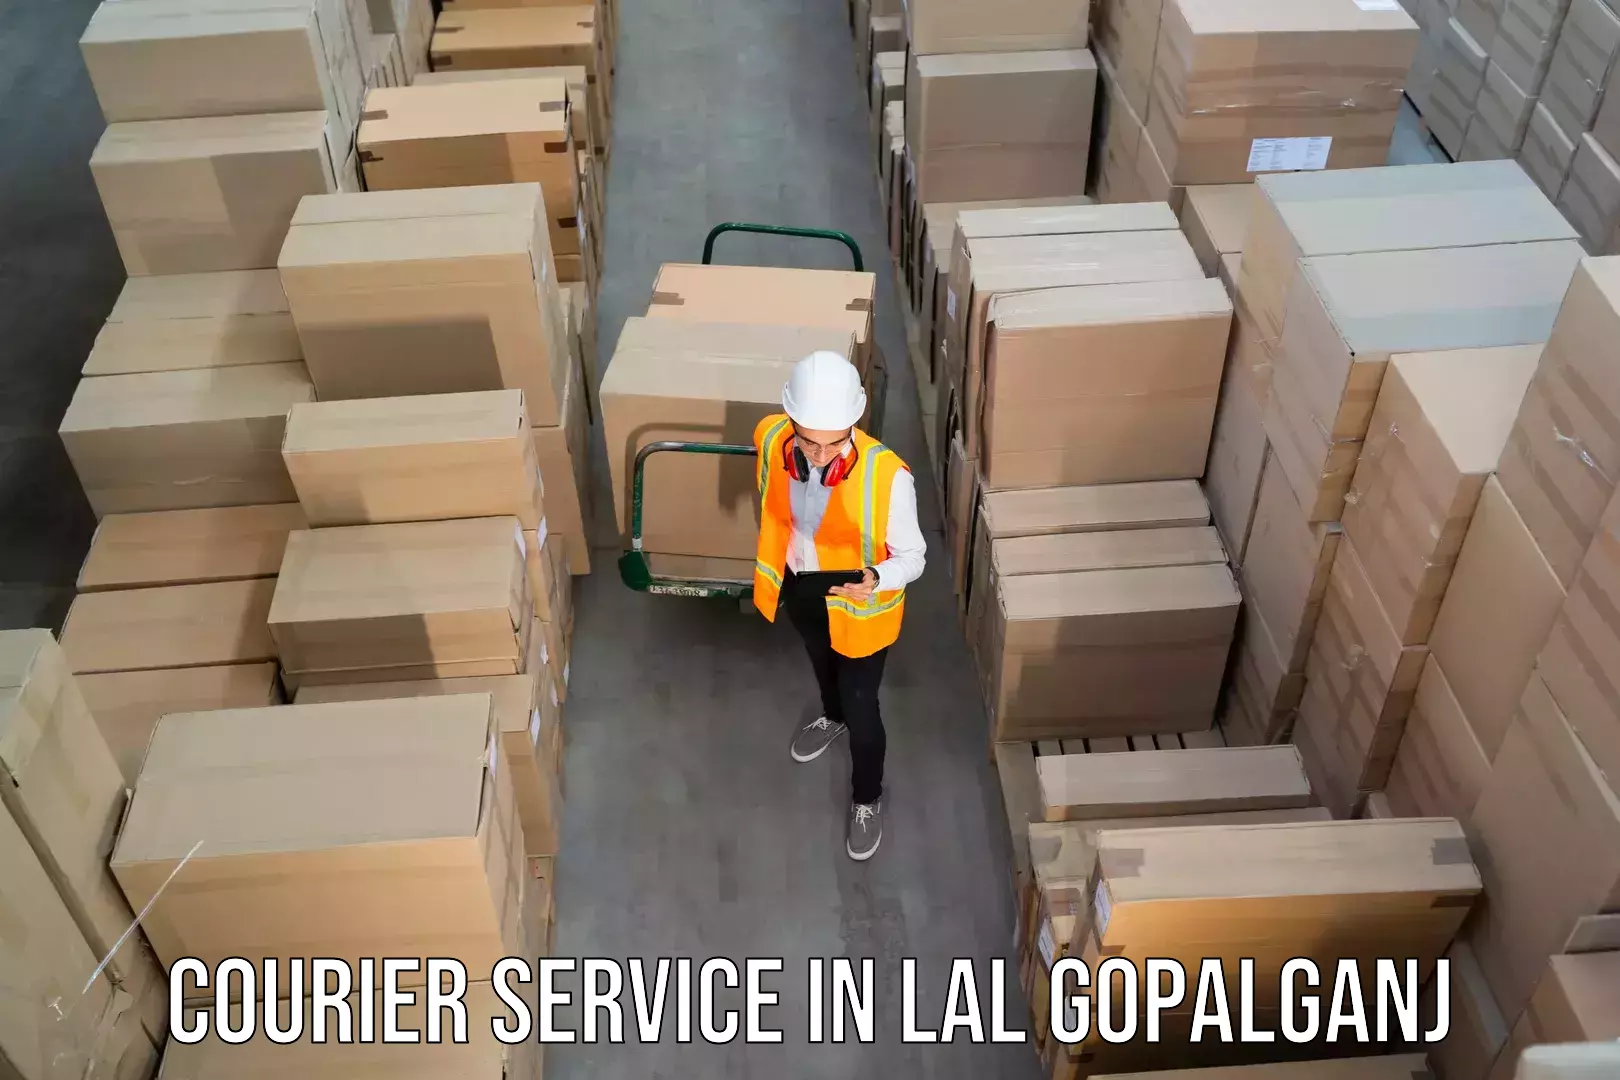 Automated shipping processes in Lal Gopalganj